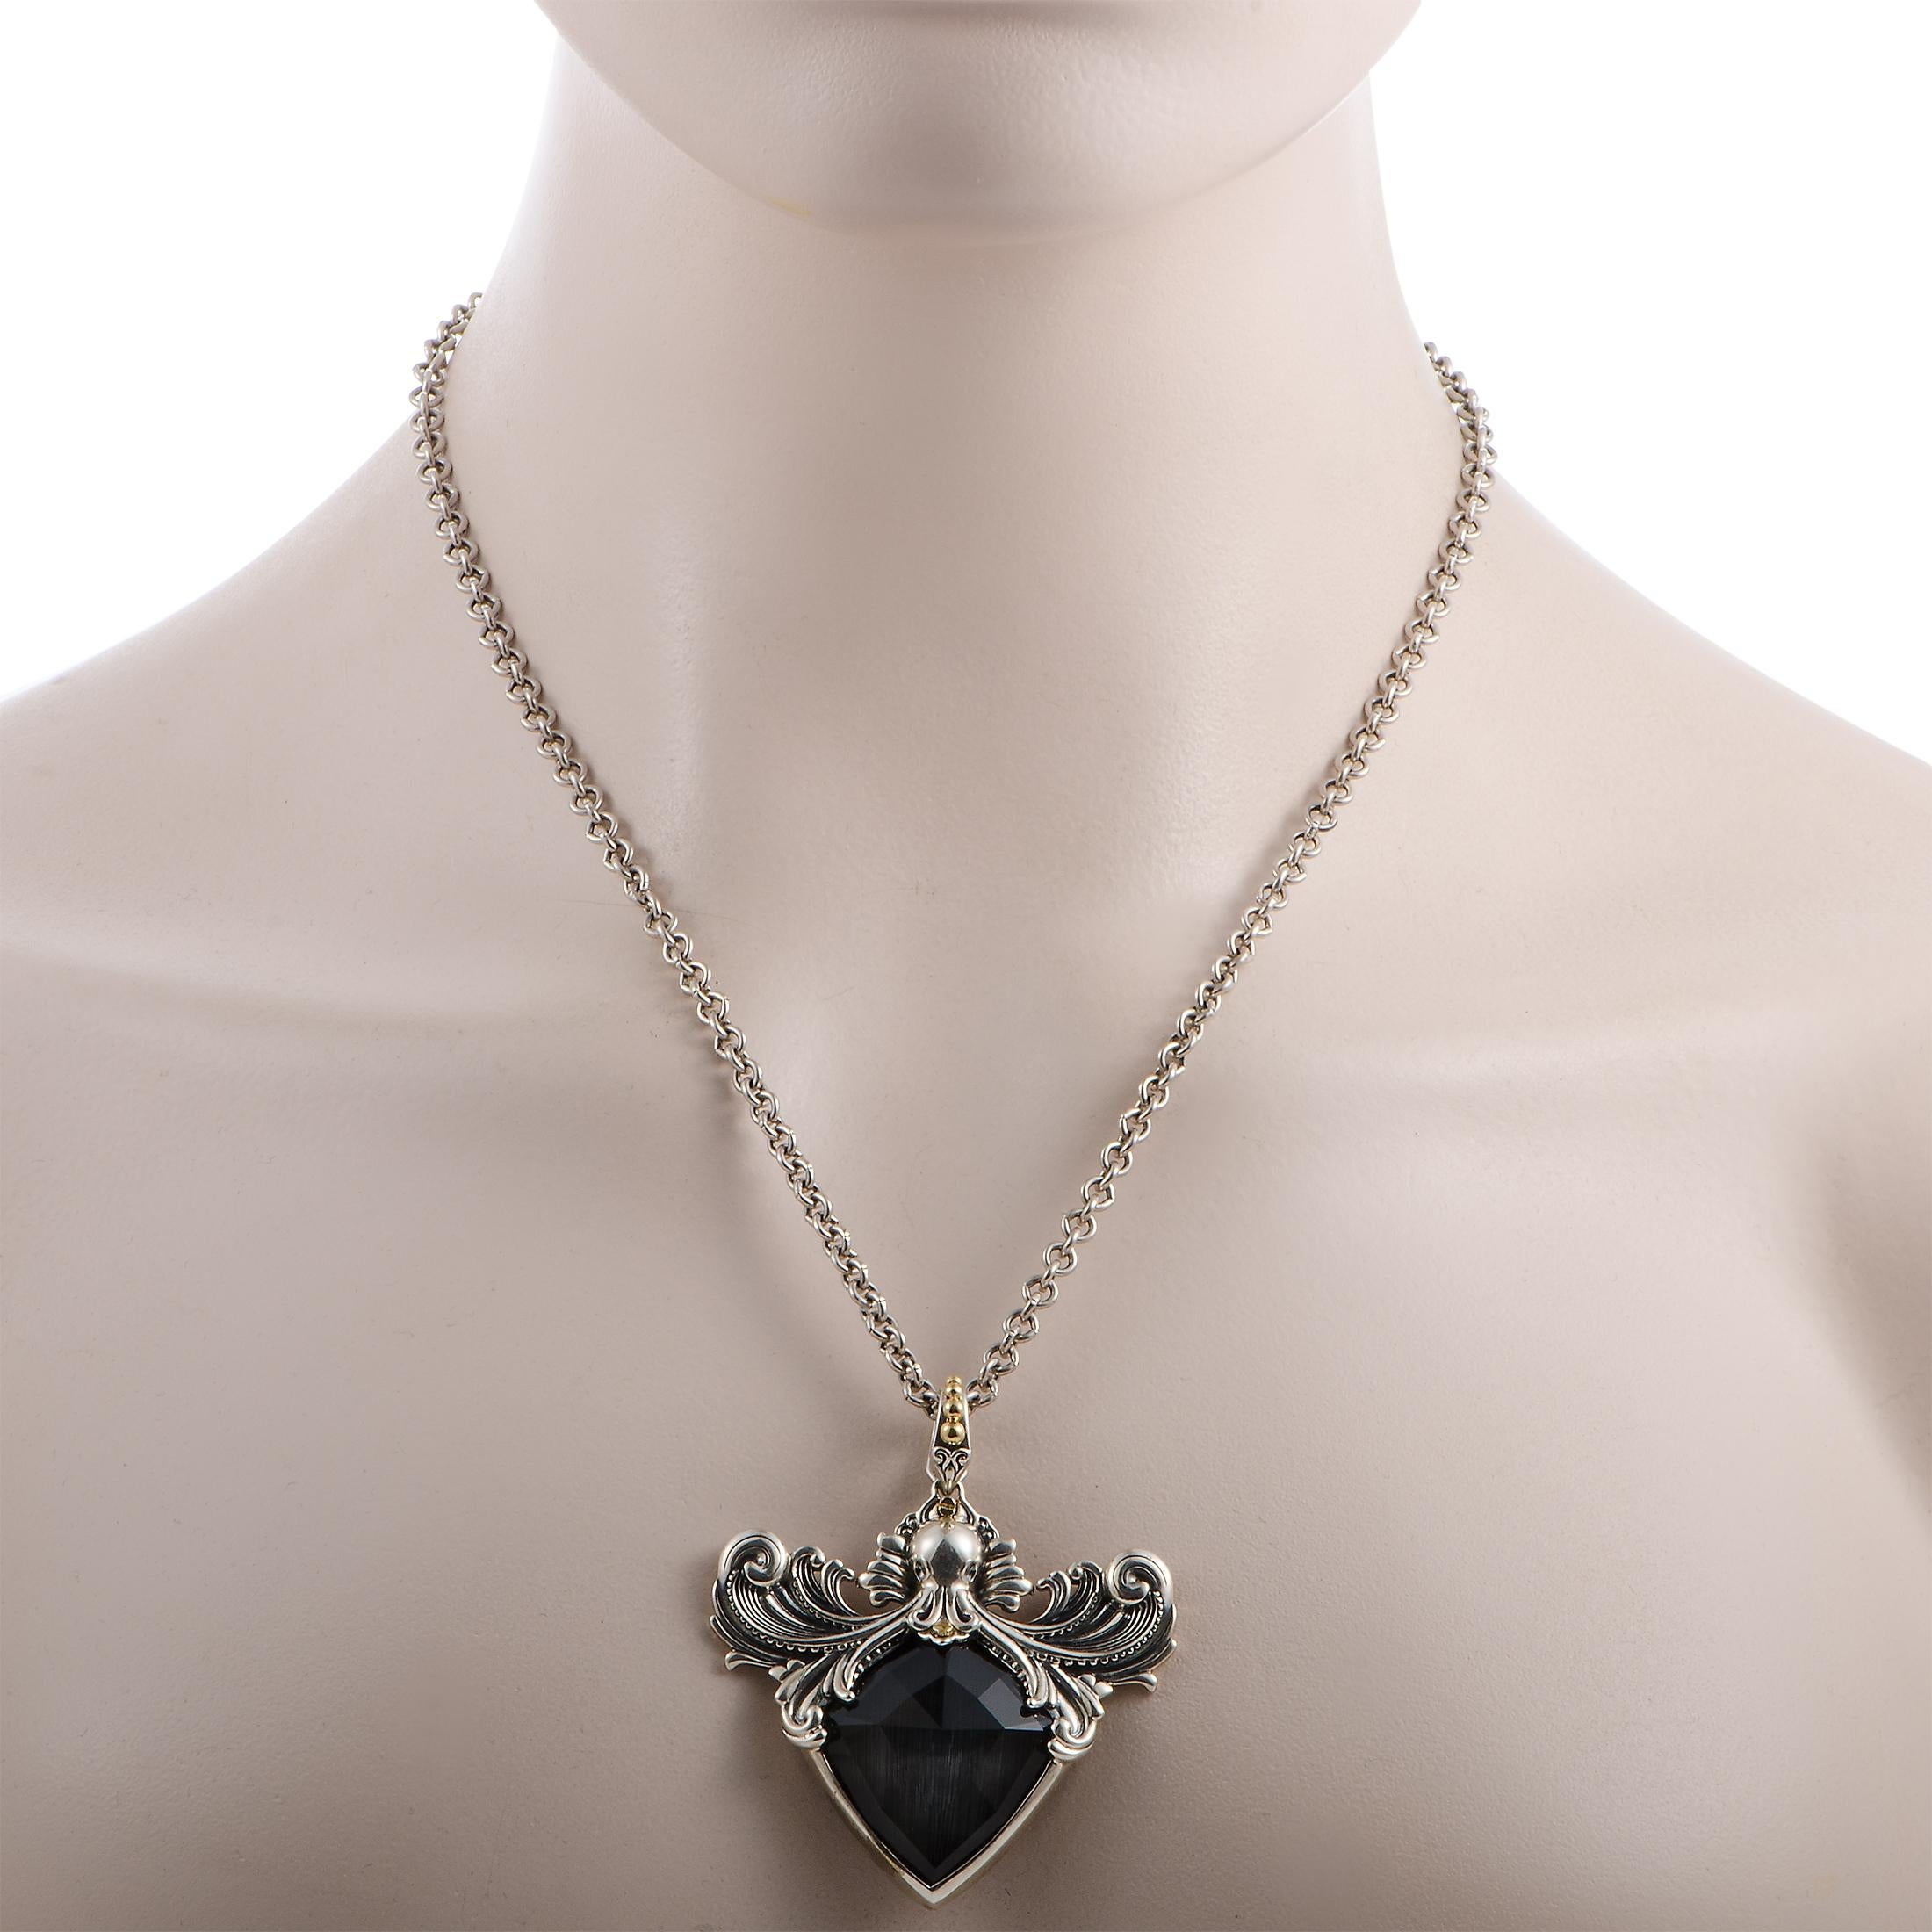 The Stephen Webster “Jewels Verne” necklace is crafted from silver and embellished with crystal. The necklace weighs 61.2 grams and boasts a 2.31” by 2.15” octopus pendant attached onto a 30.00” chain that features lobster claw closure.
 
 This